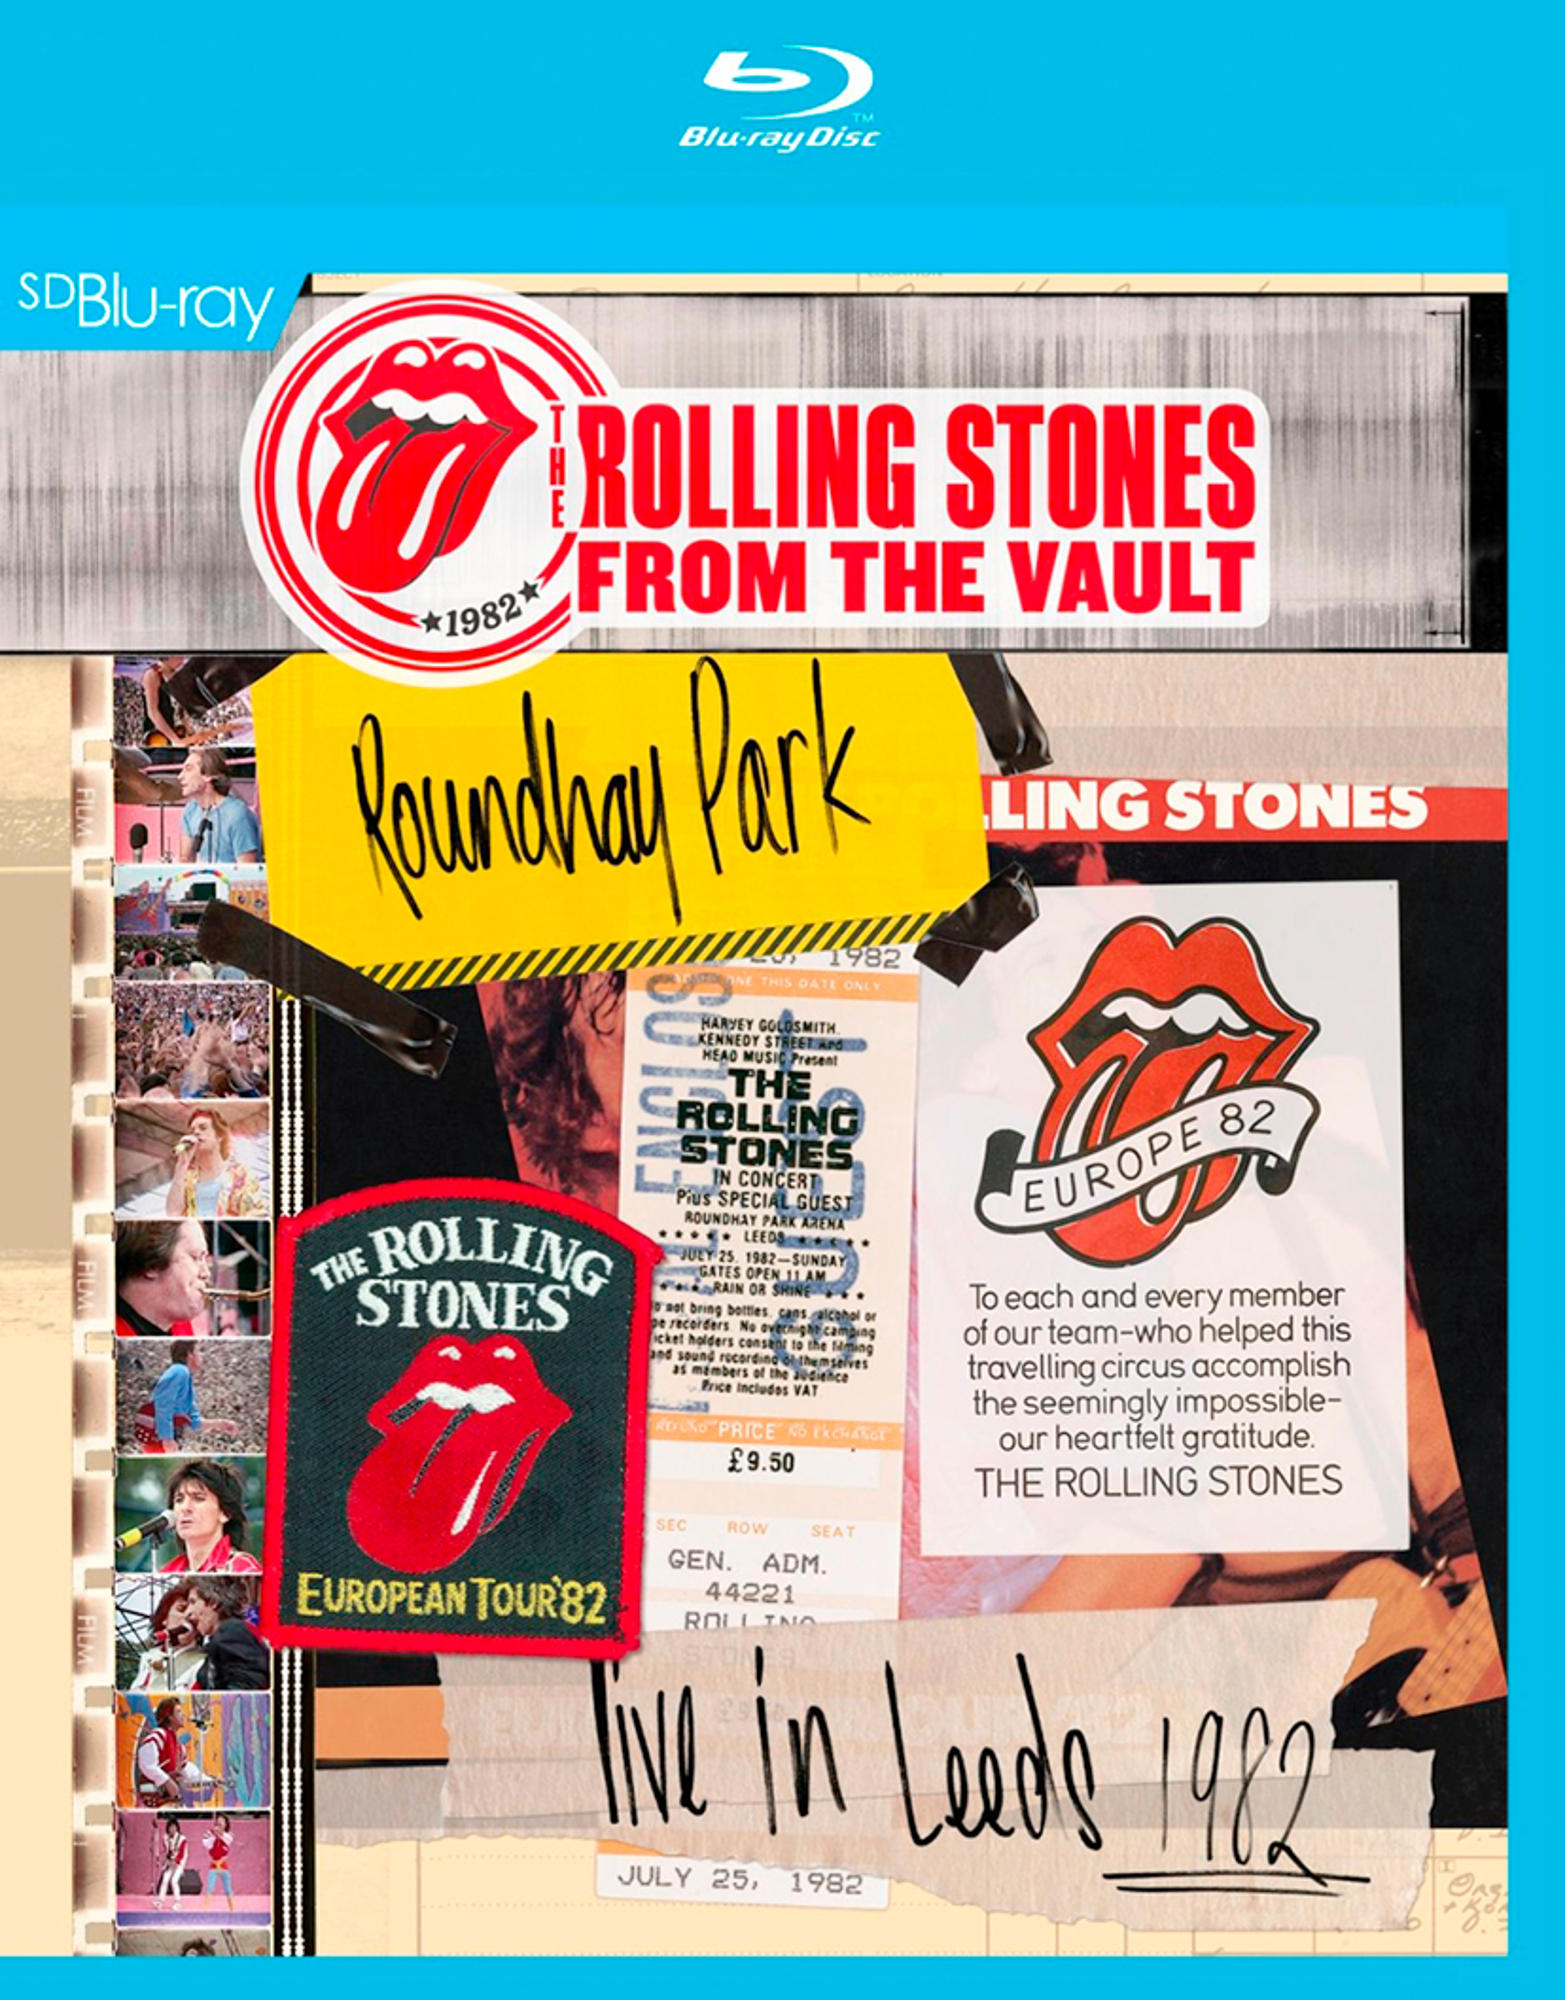 The Rolling Stones - - Leeds 1982 From Vault-Live In (Blu-ray) The